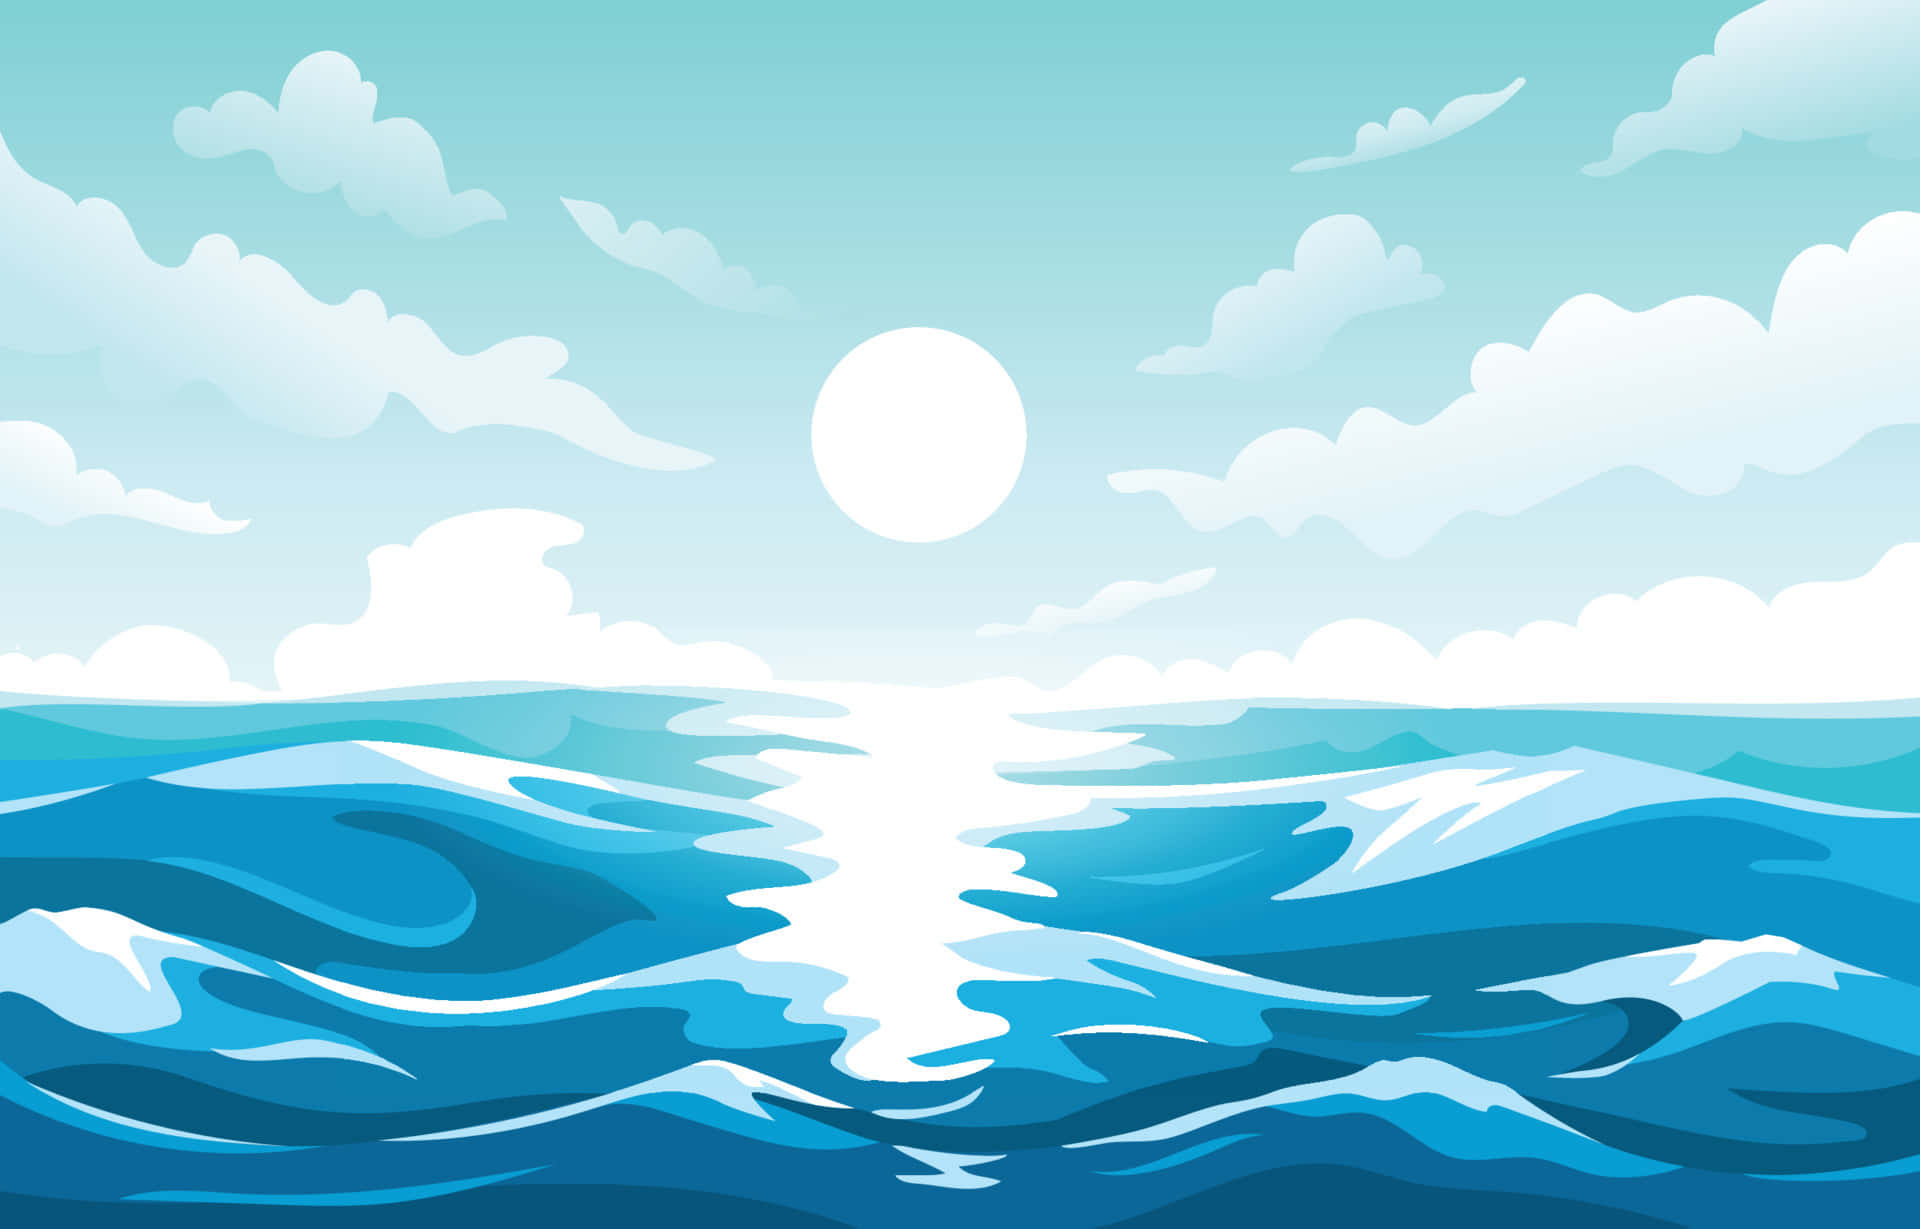 A Cartoon Illustration Of The Ocean With Clouds And Sun